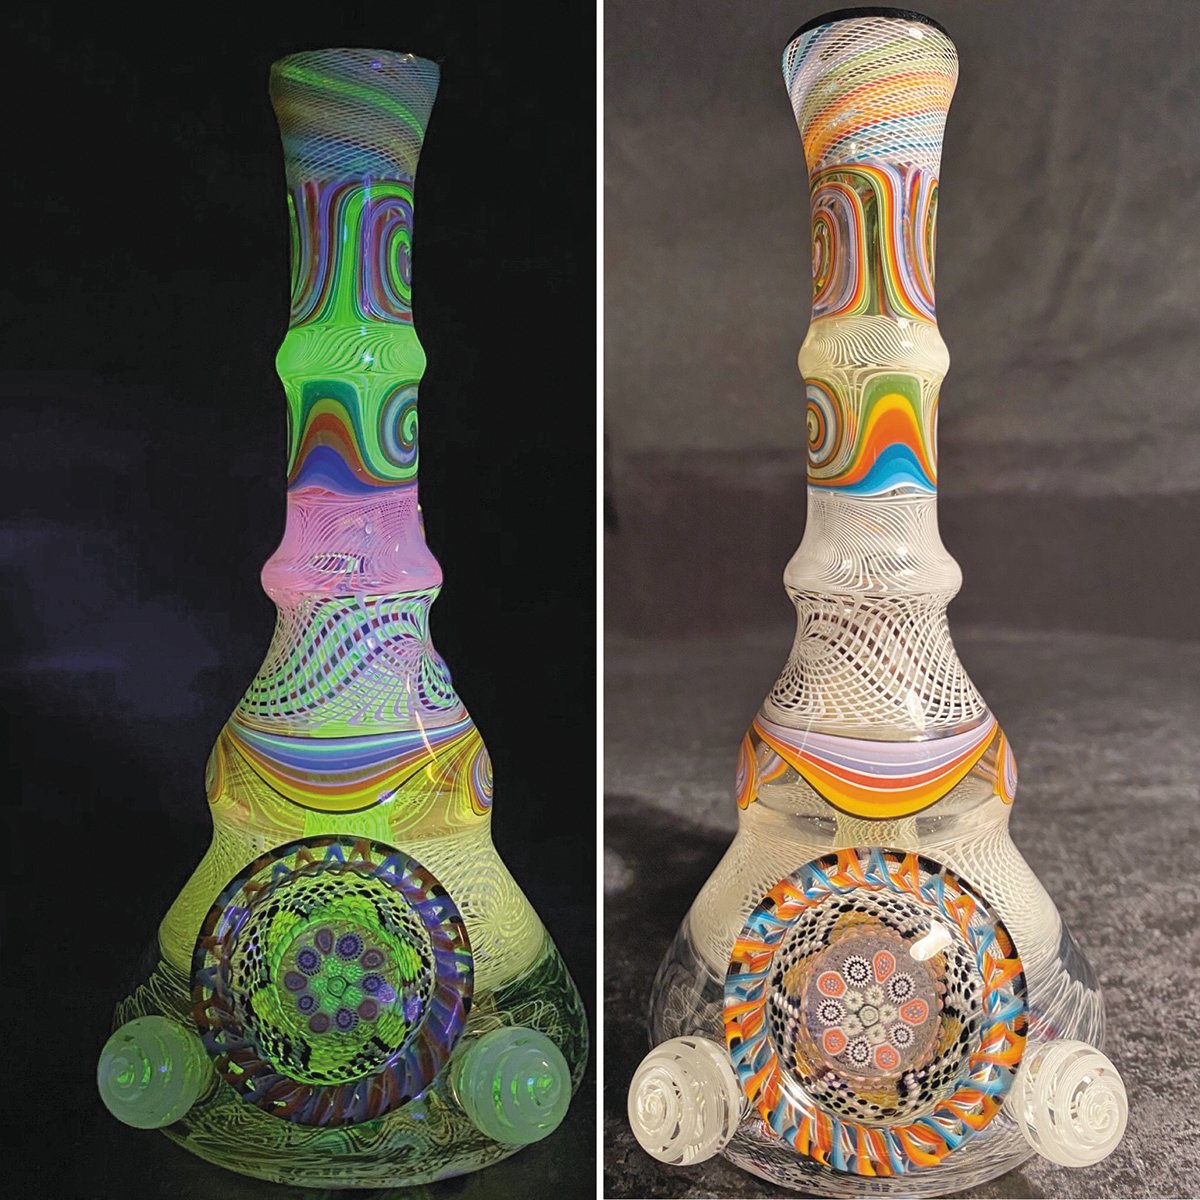 One of a kind glassware crafted by artist Ben Birney.